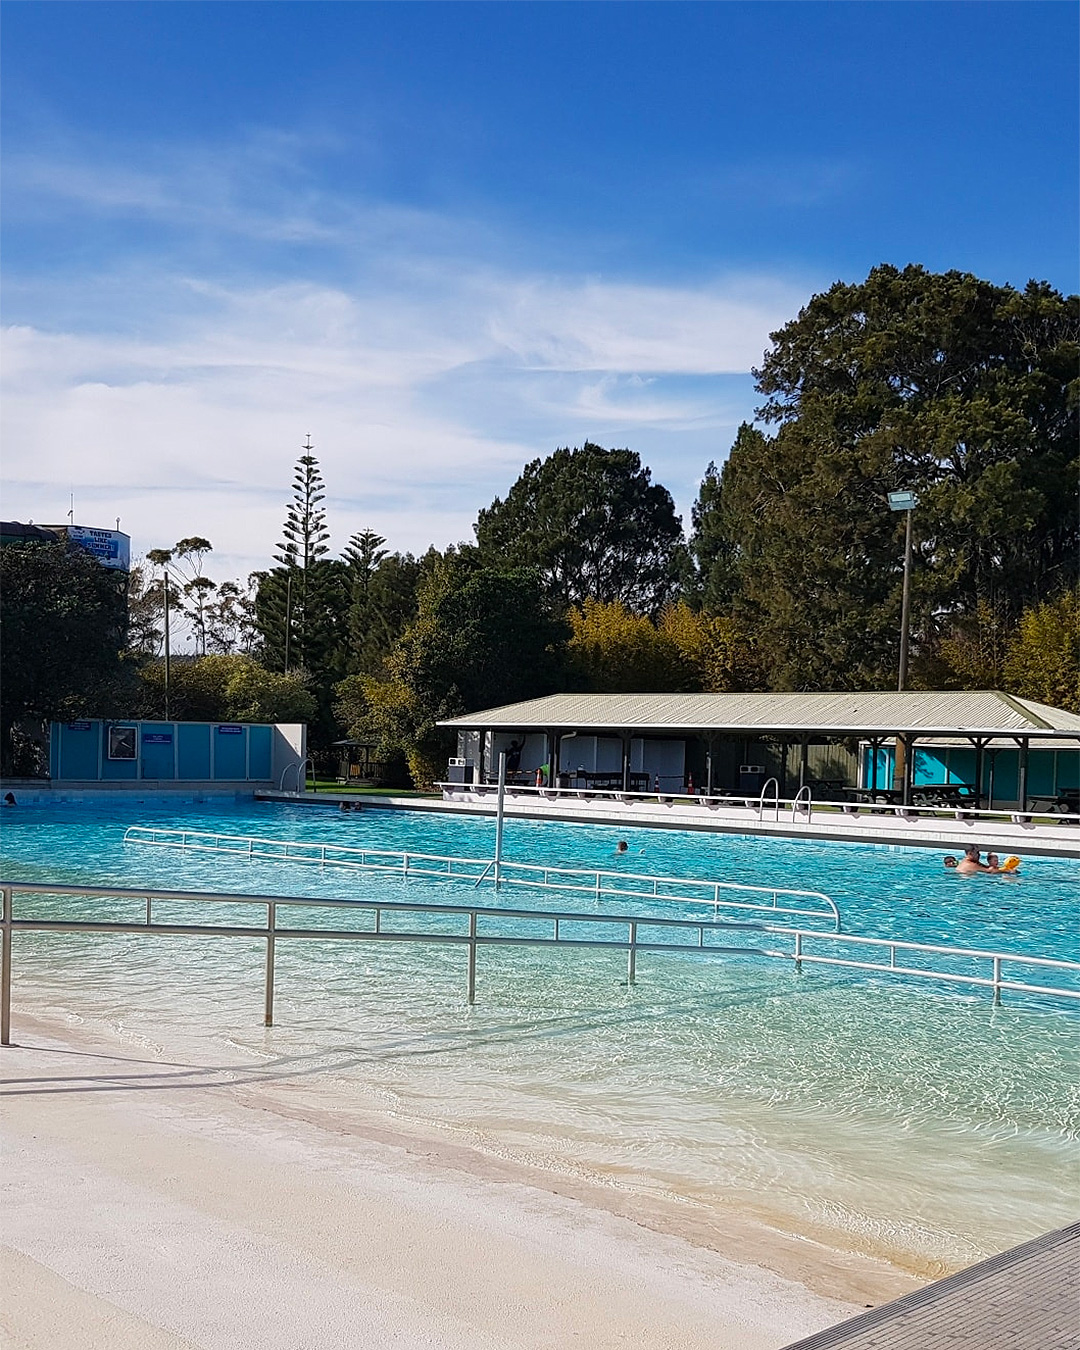 The outdoor pool at Parakai Springs swimming pool in Auckland.